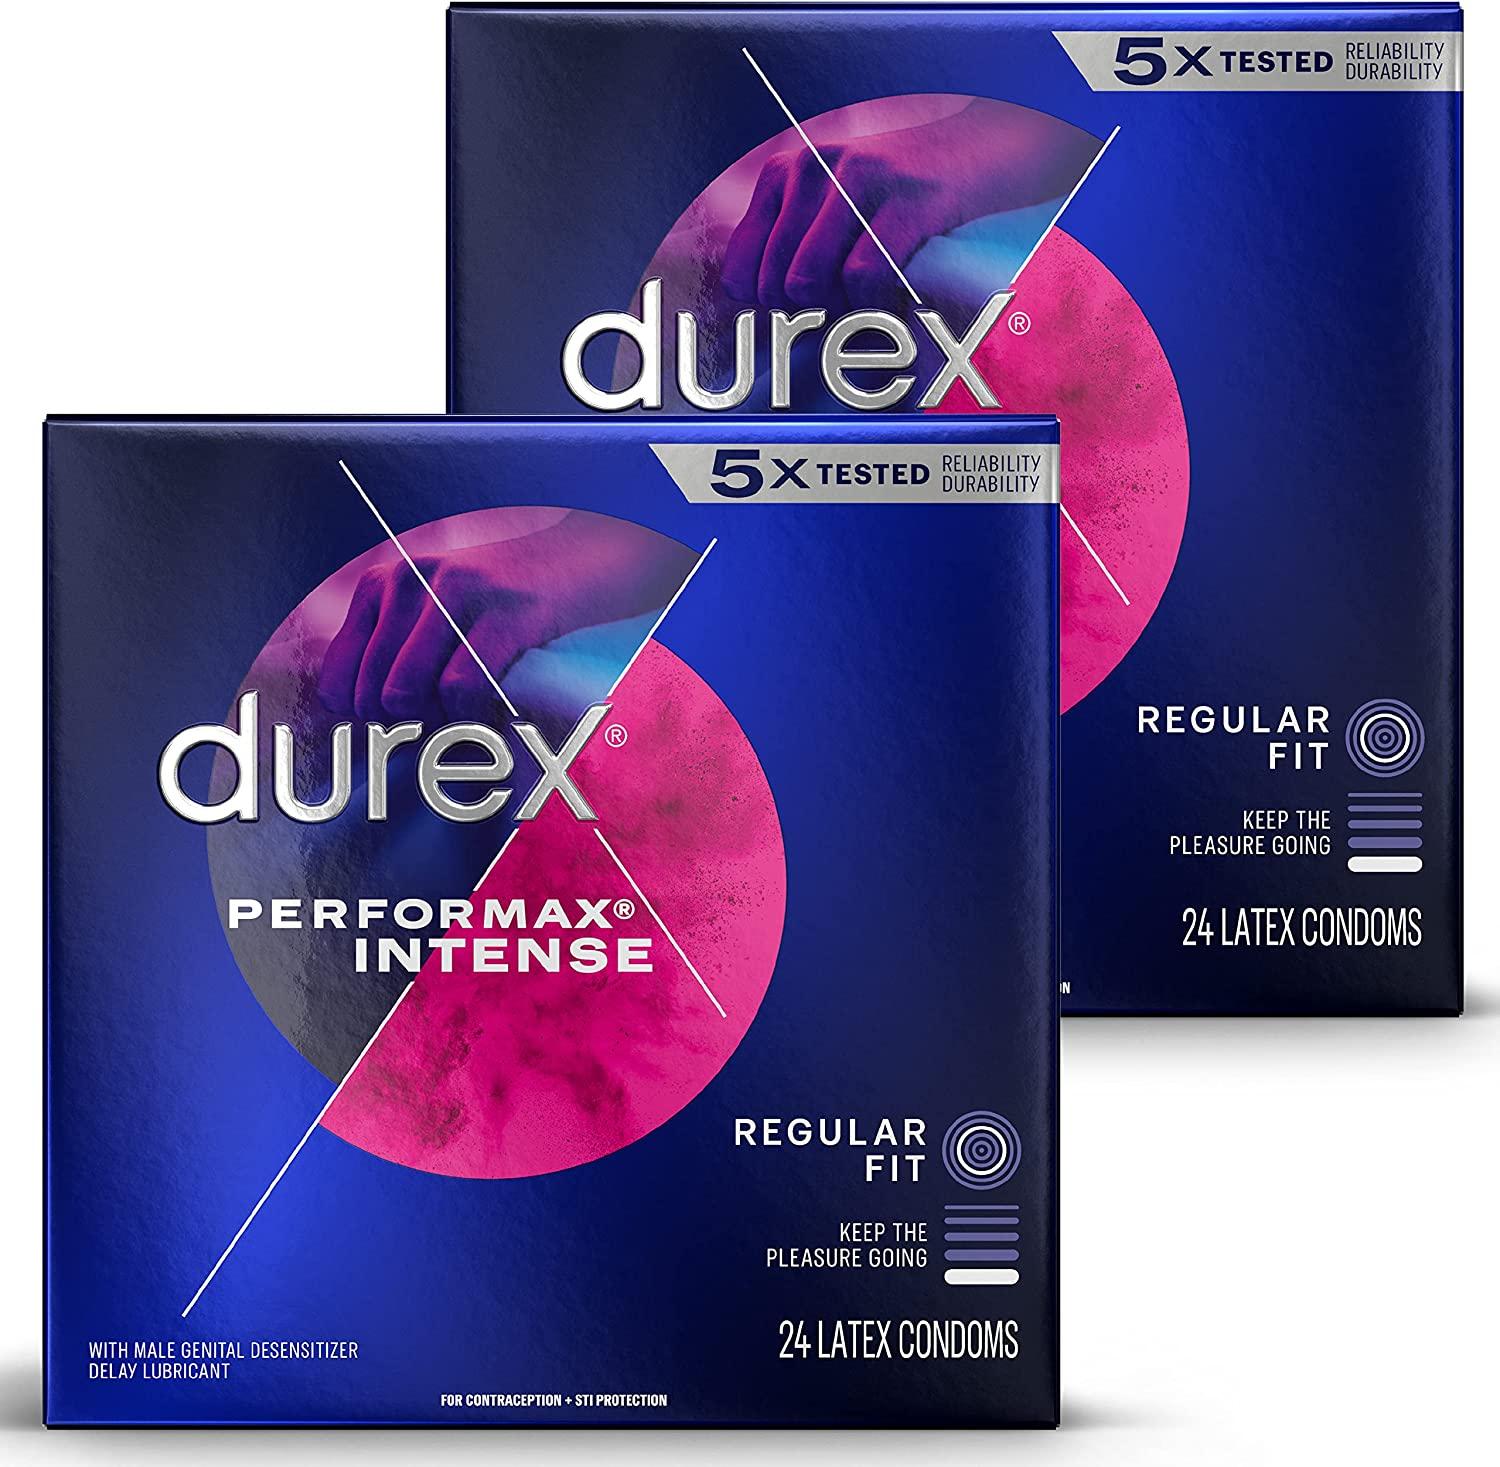 Durex Performax Intense Natural Rubber Ribbed Condoms for $18.35 Shipped